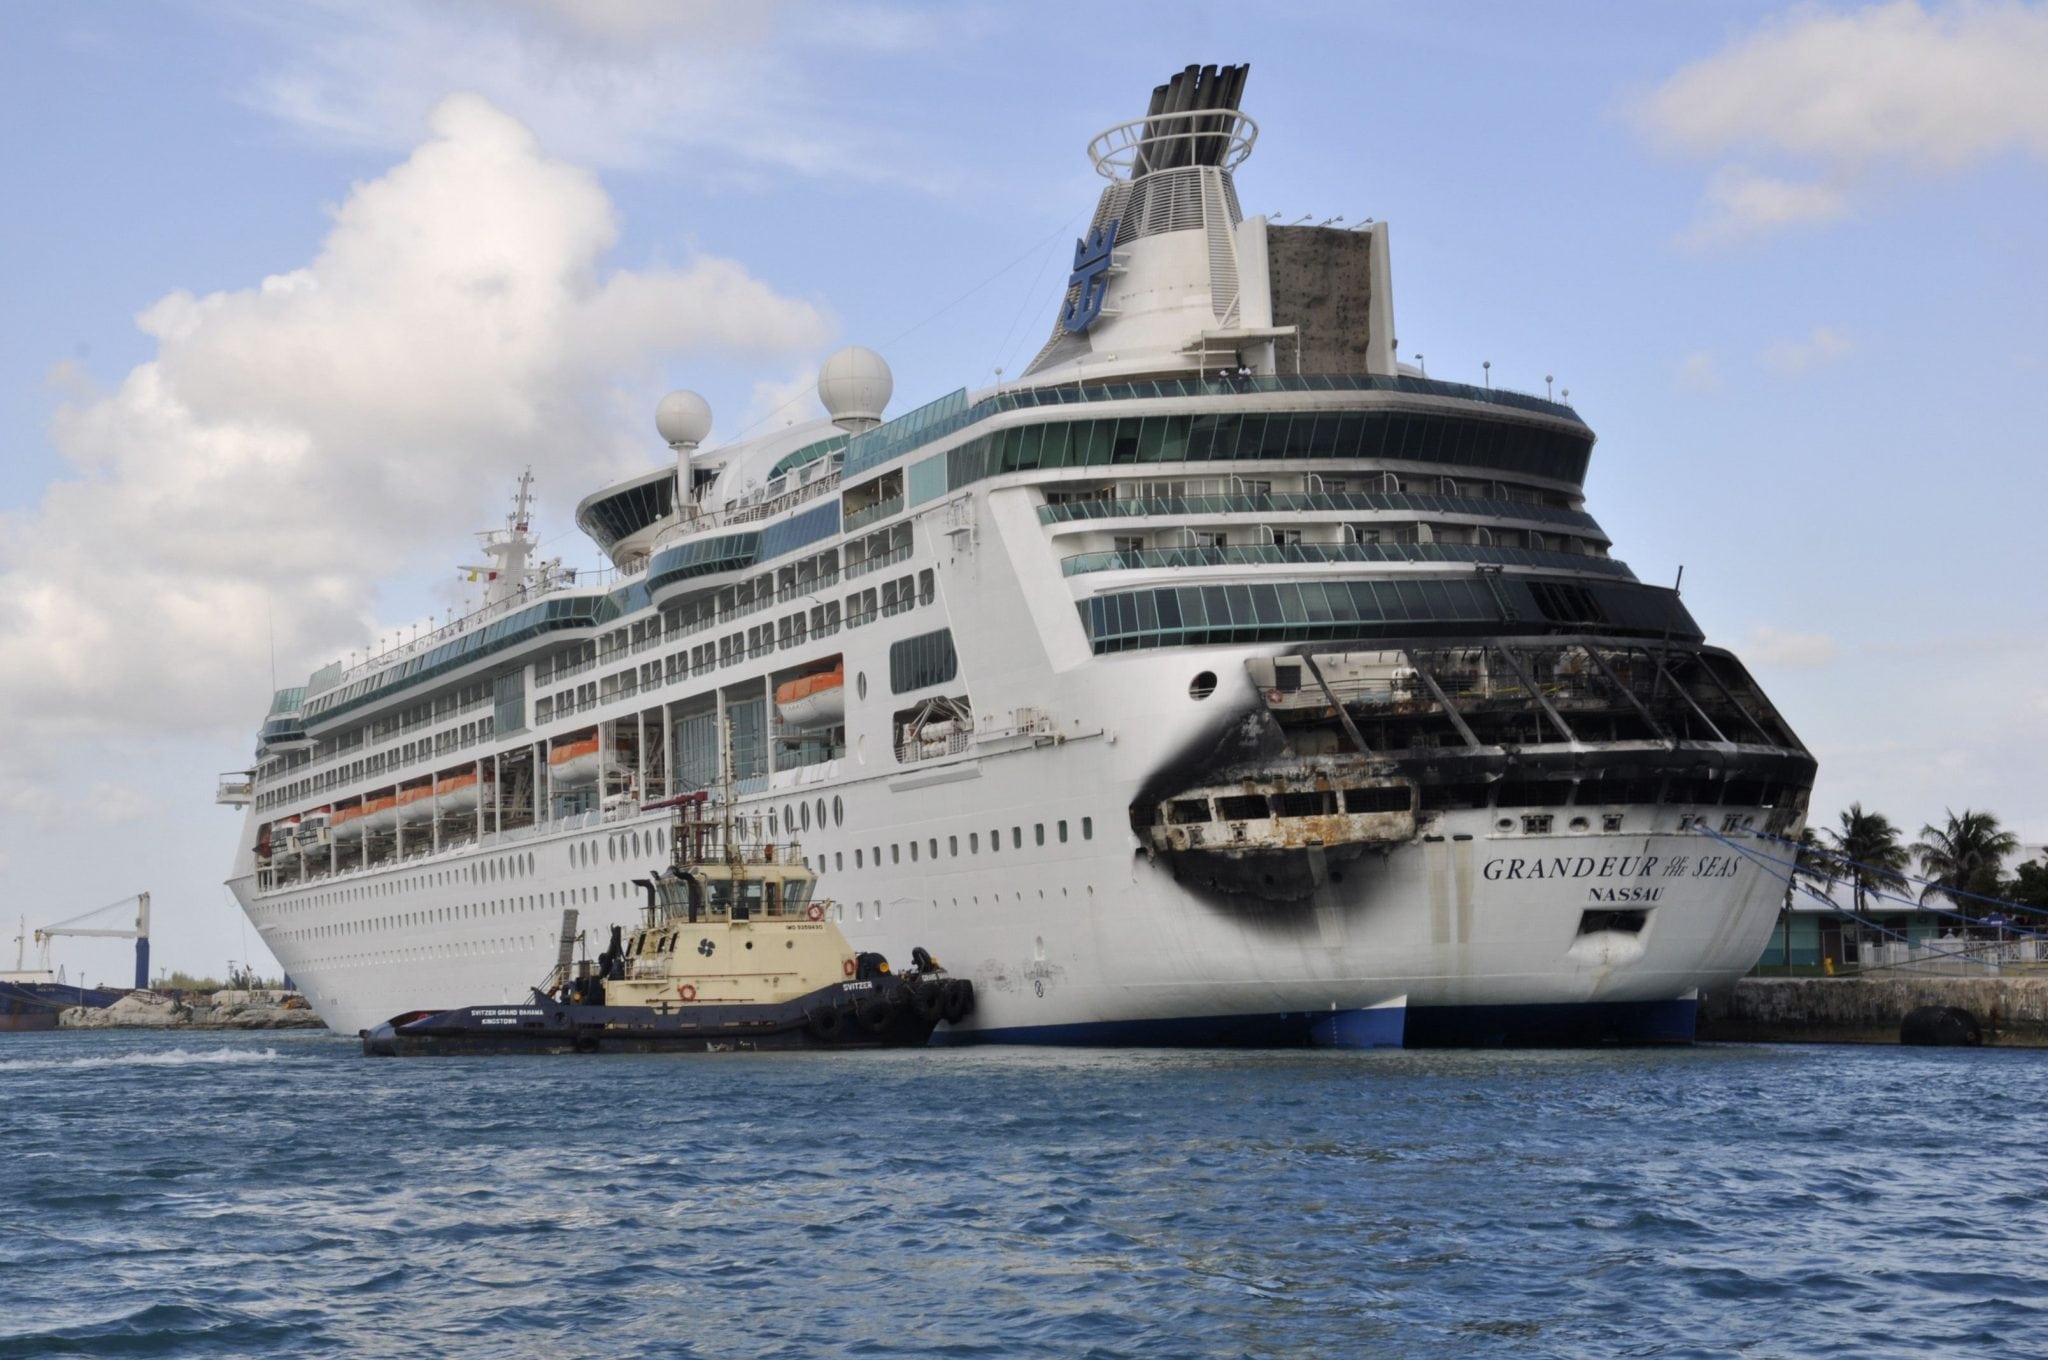 Cost of this week's Royal Caribbean ship fire So far it's 10 cents per